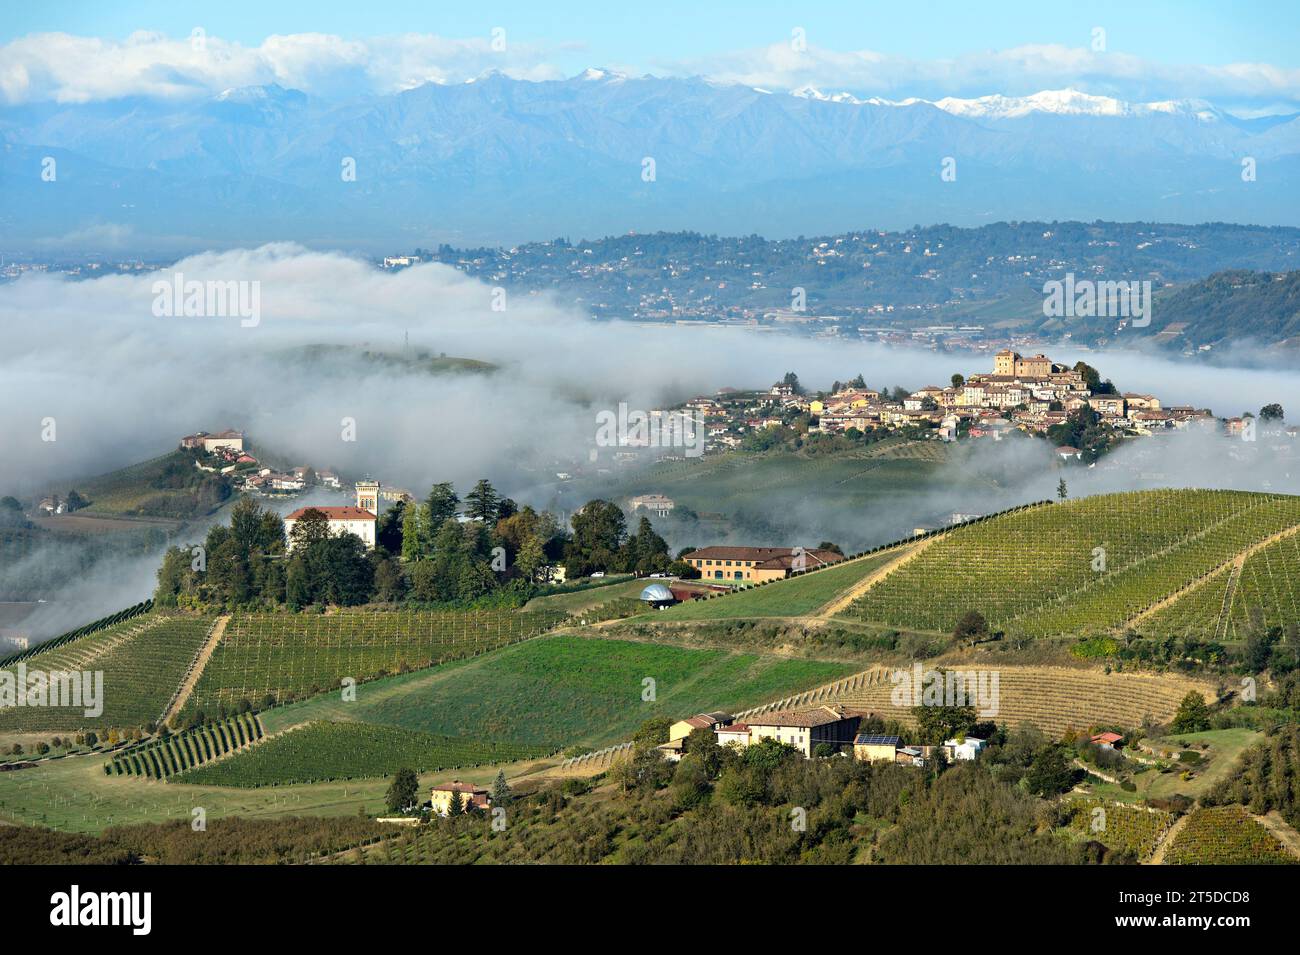 Autumnal fog surrounds the village of Roddi in the hilly landscape of the Langhe wine-growing region, Diano d'Alba, Piedmont, Italy Stock Photo